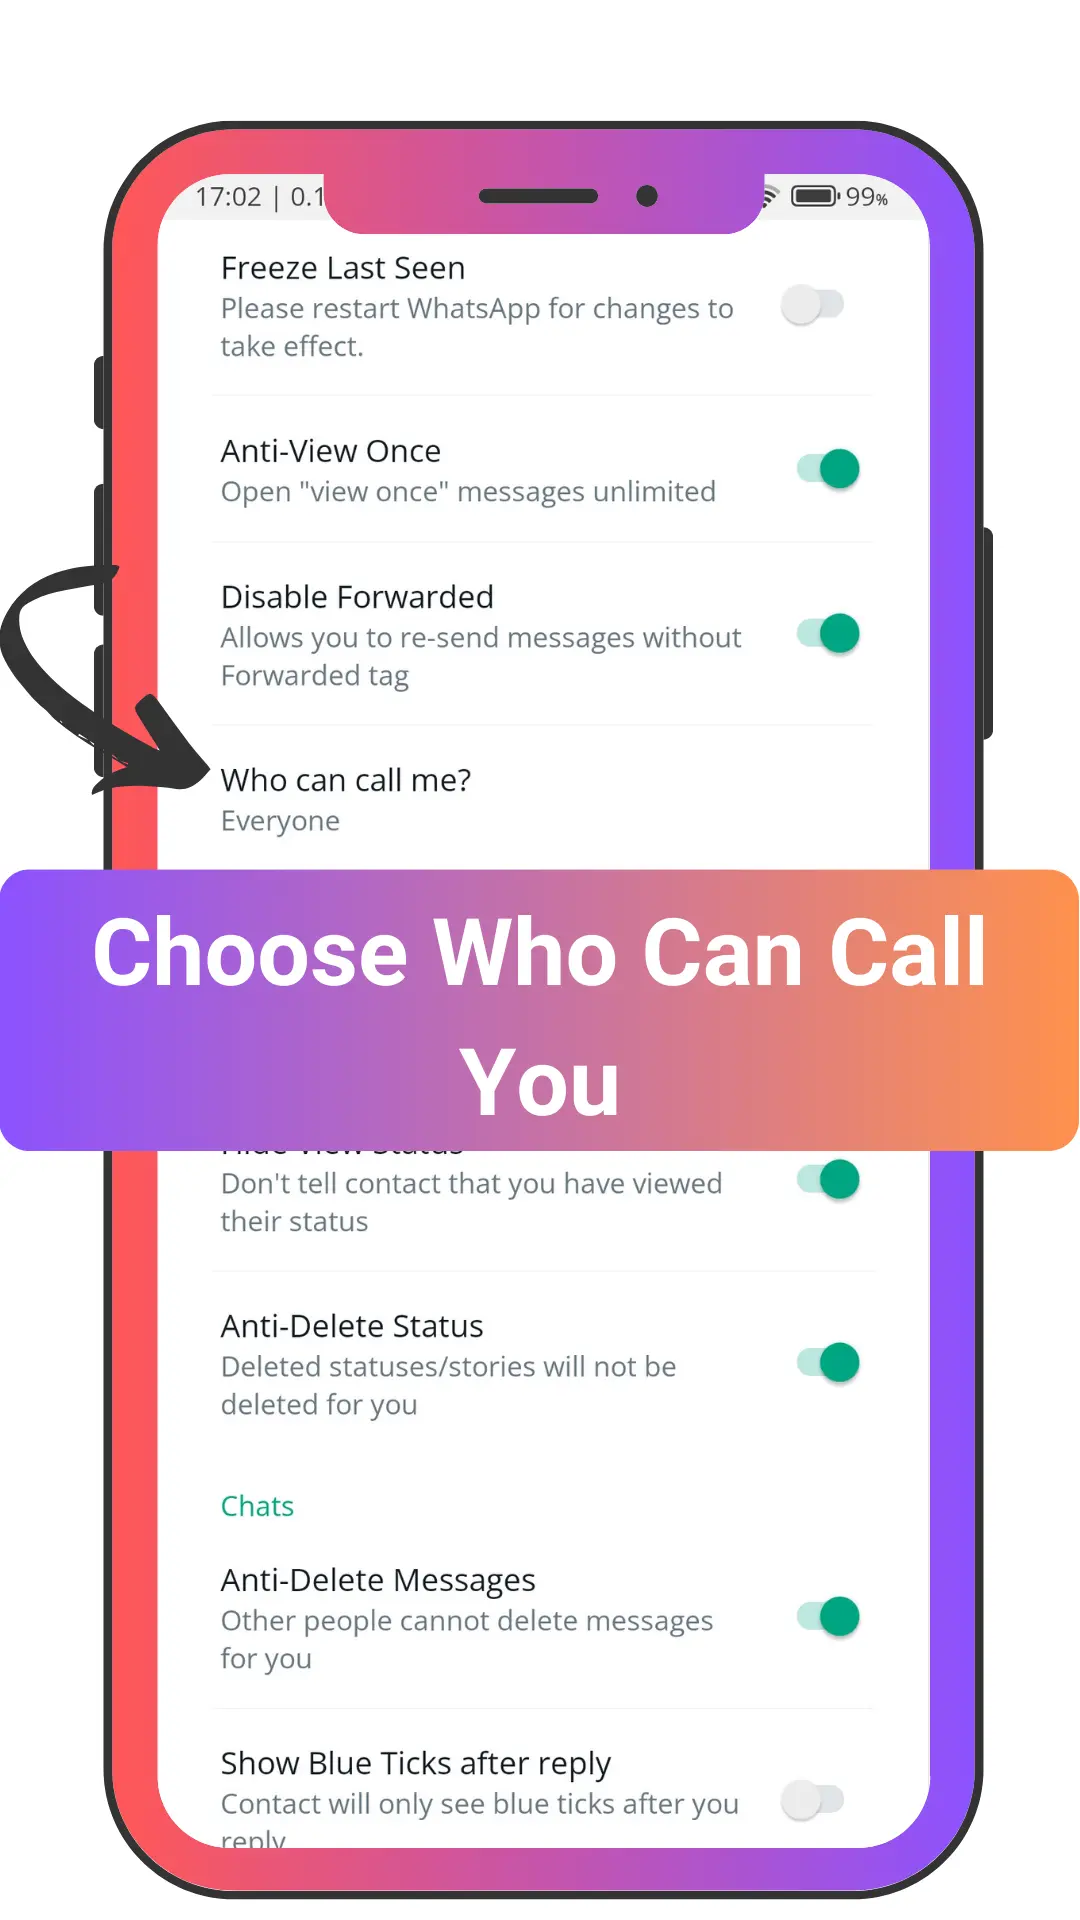 Choose Who Can Call You